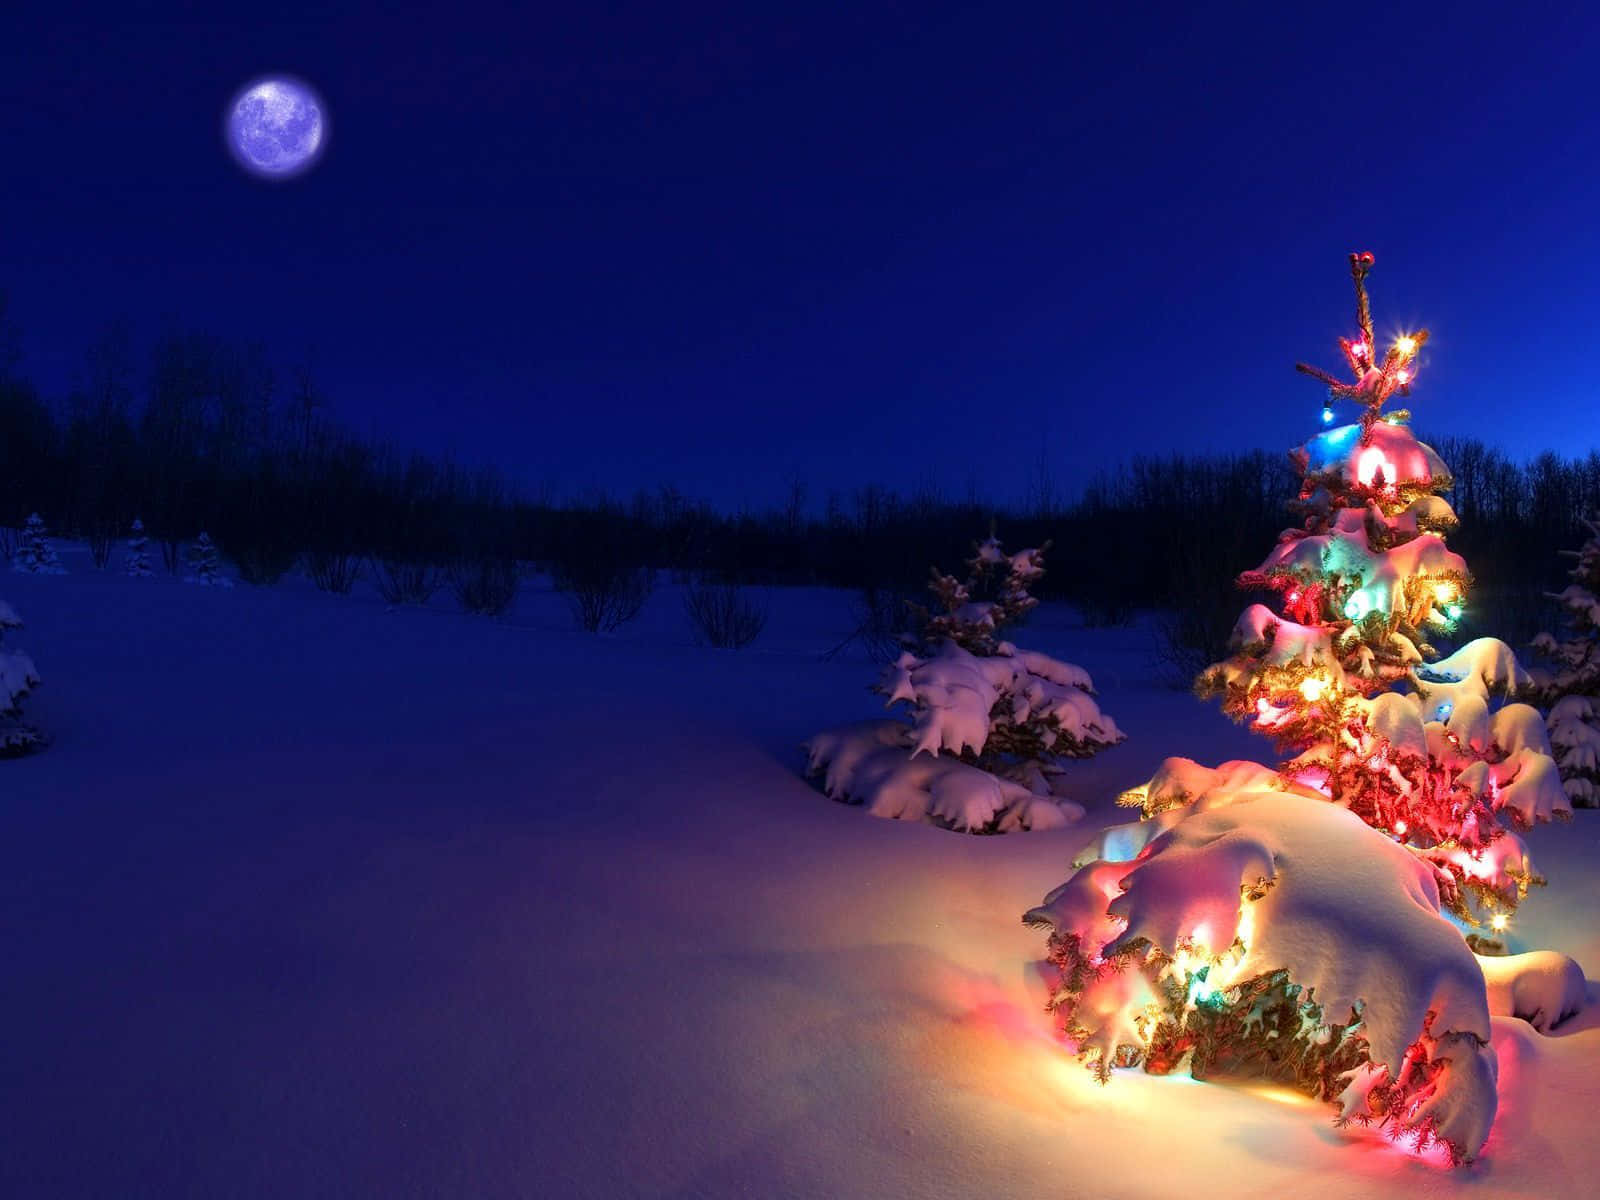 Shining Moon Over Snow Christmas Background